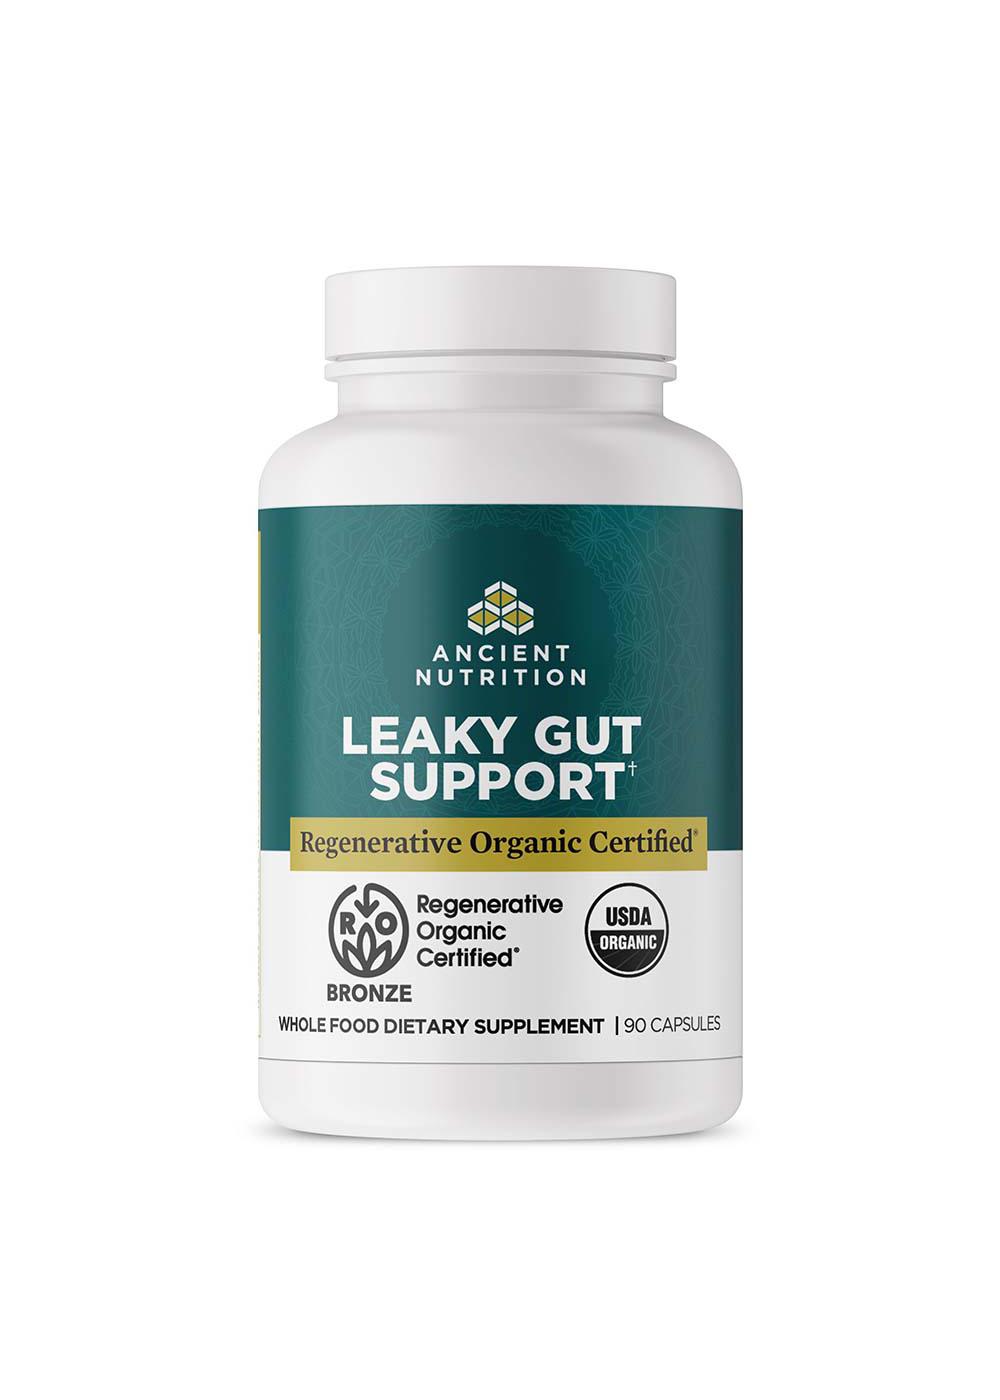 Ancient Nutrition Leaky Gut Support Capsules; image 1 of 3